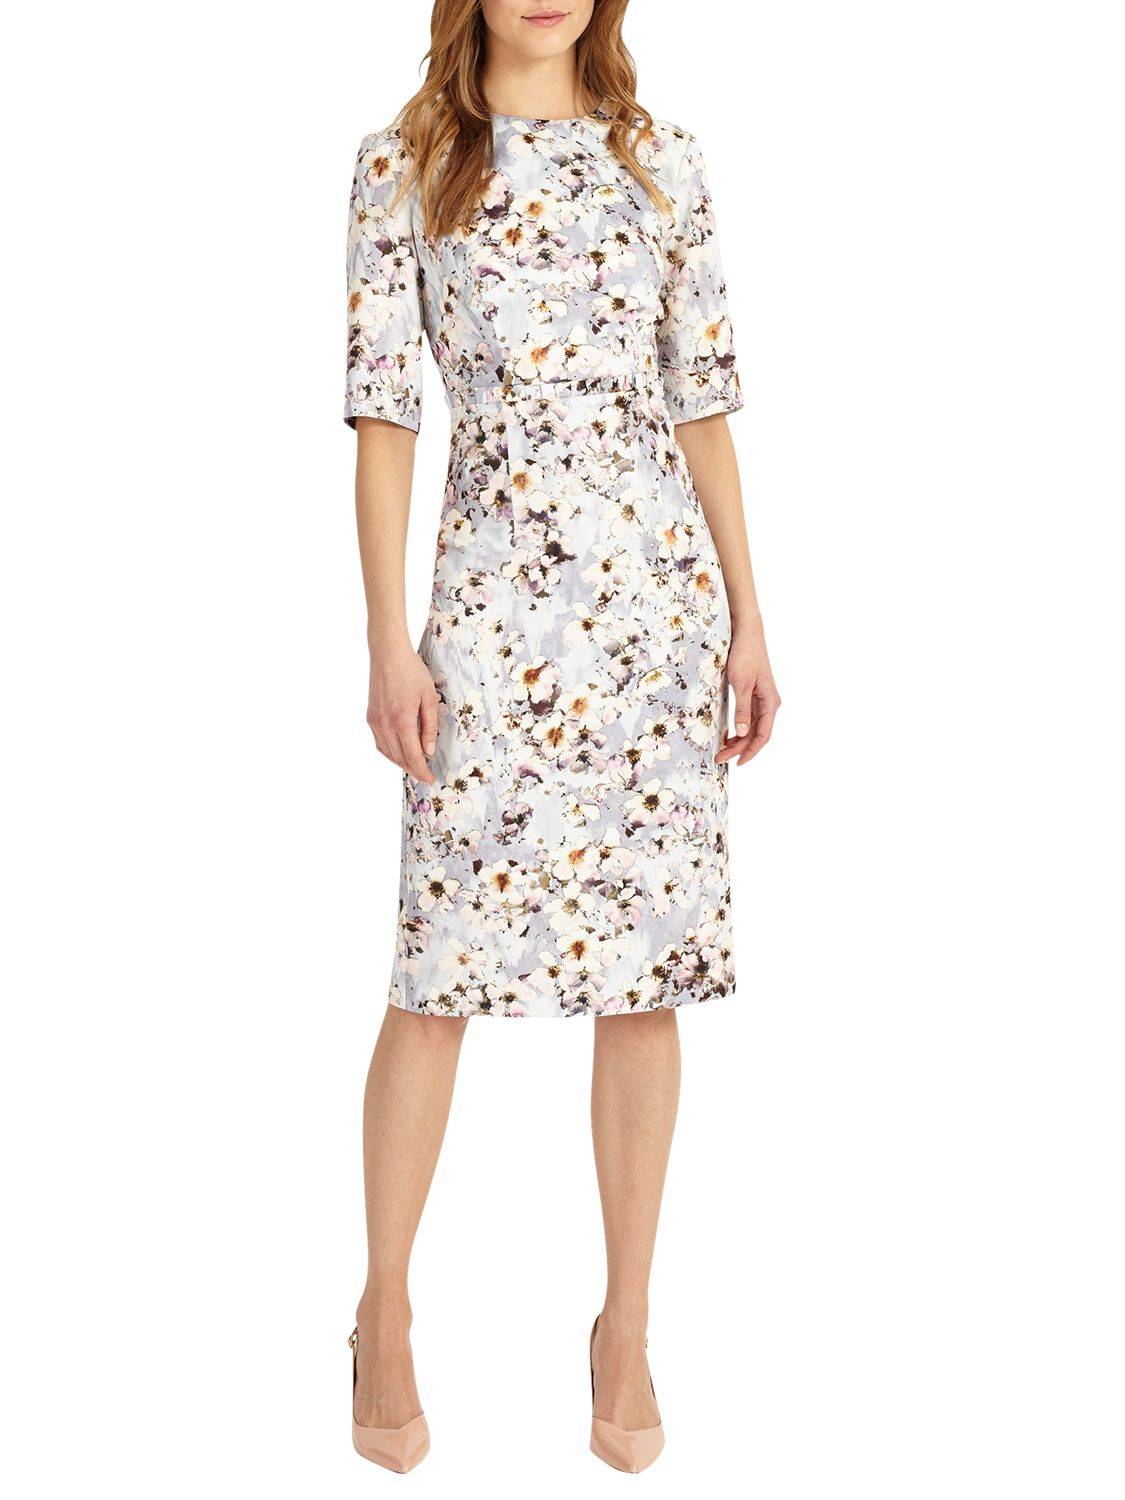 Phase Eight Ember Floral Print Dress, Mineral, 12